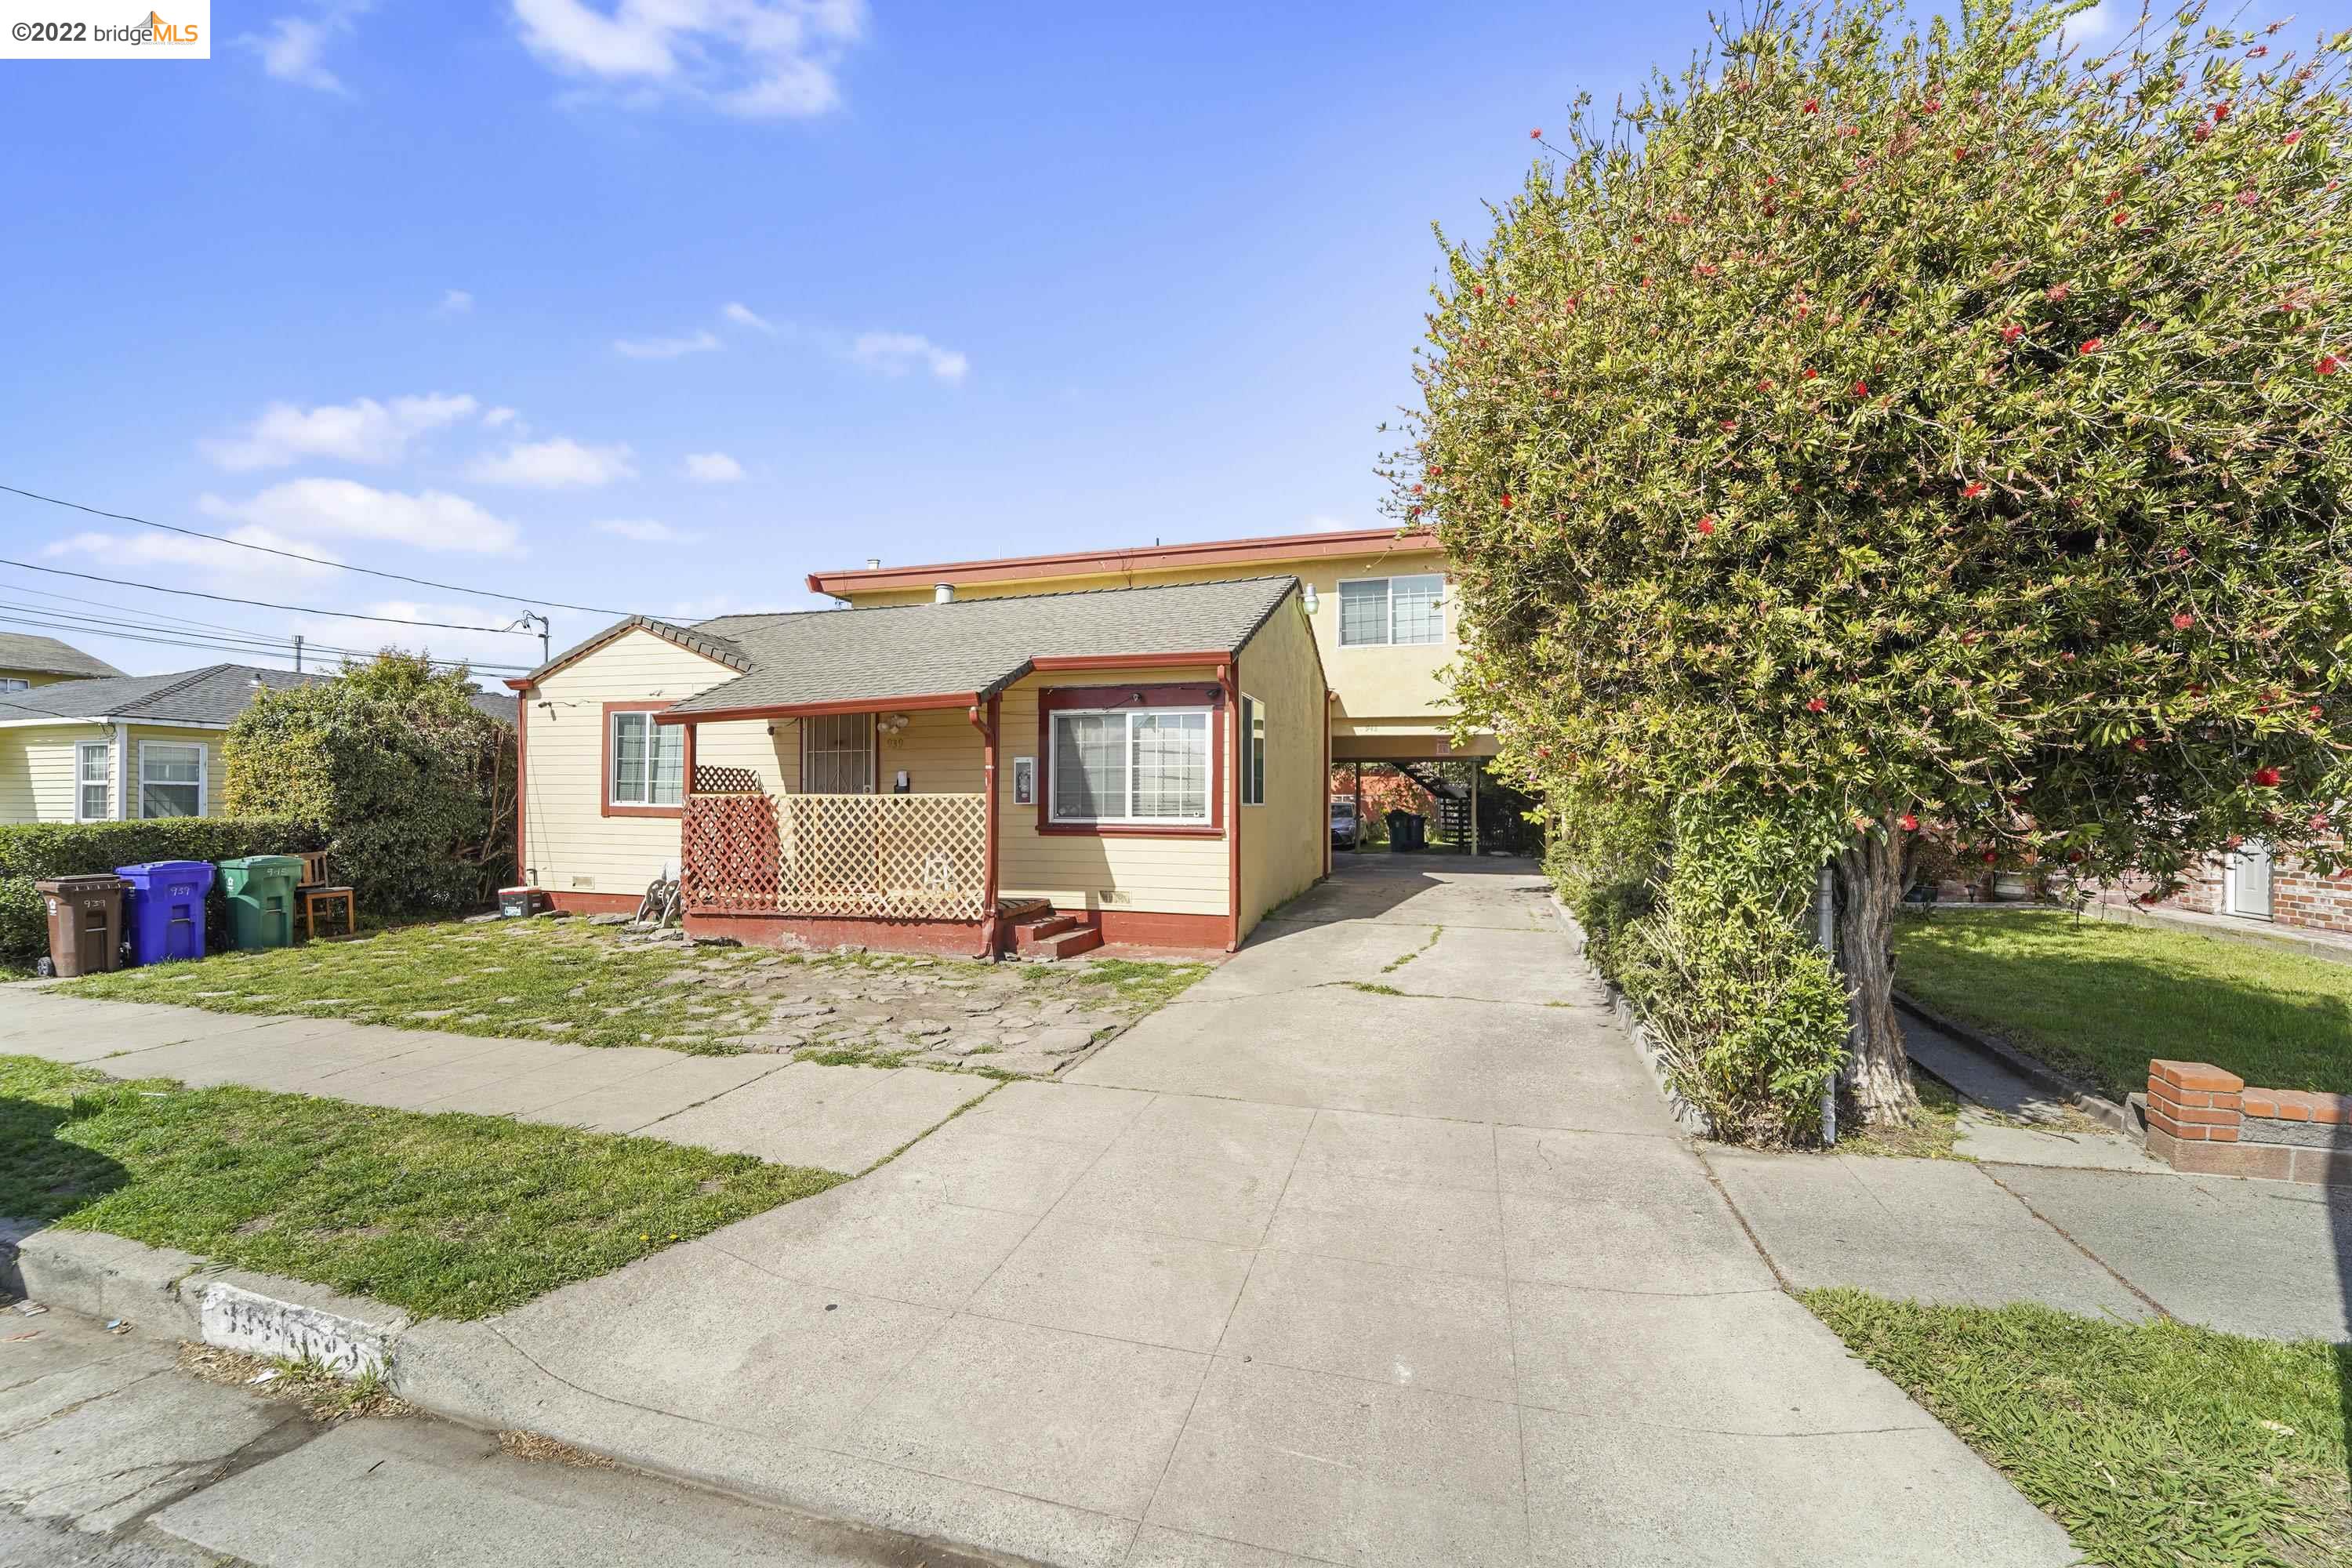 Photo of 939 S 45th St in Richmond, CA